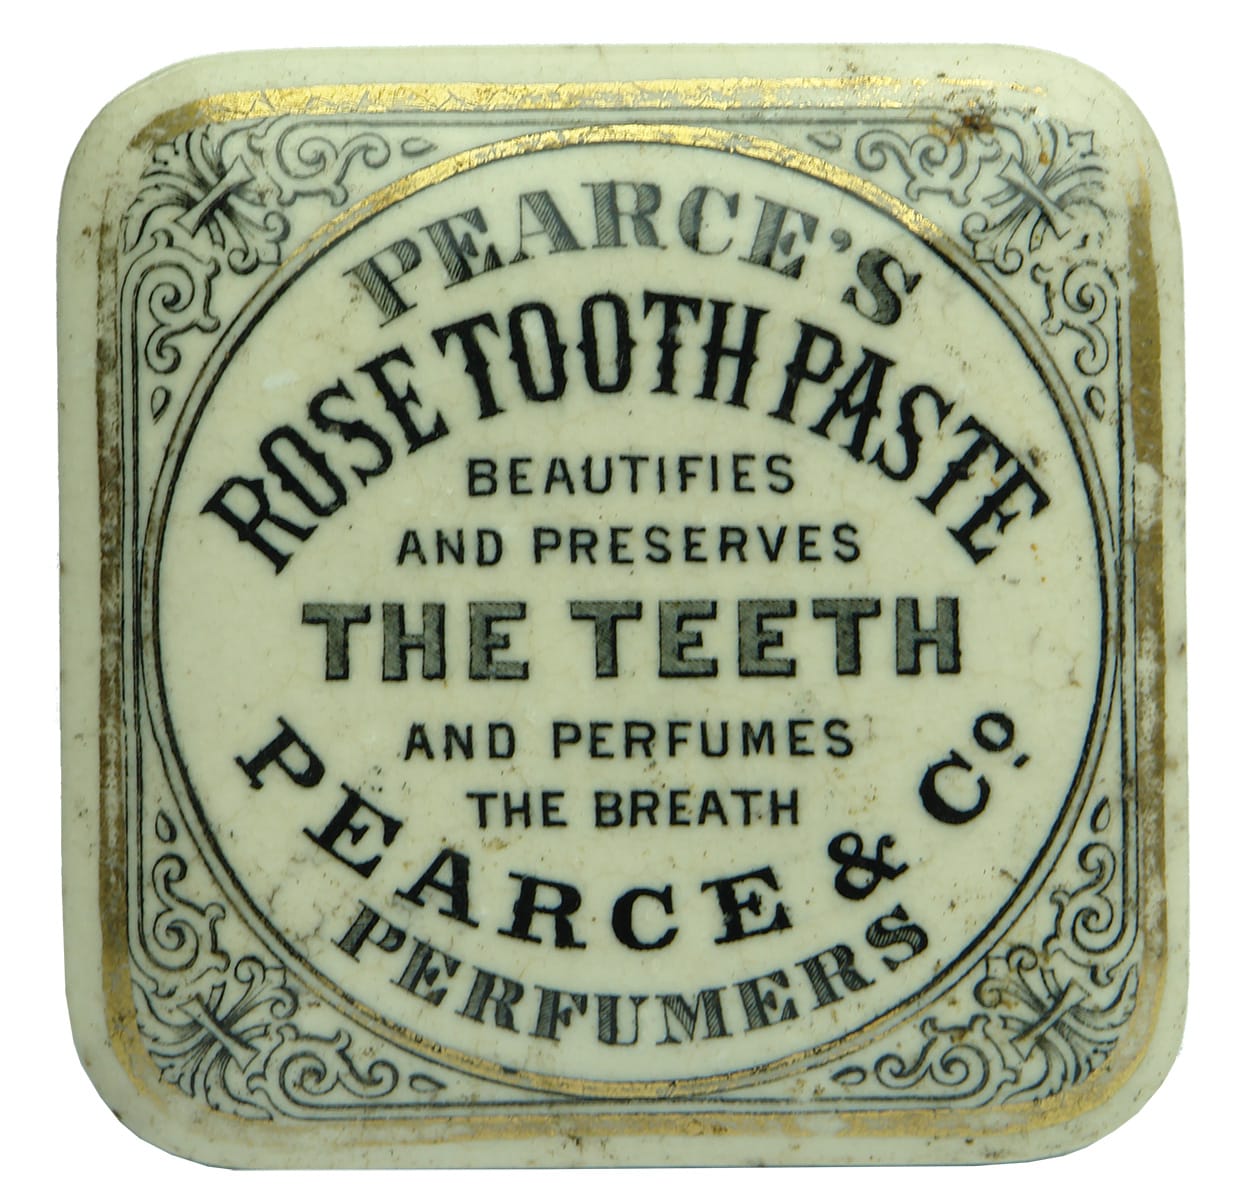 Pearce's Rose Tooth Paste Pot Lid